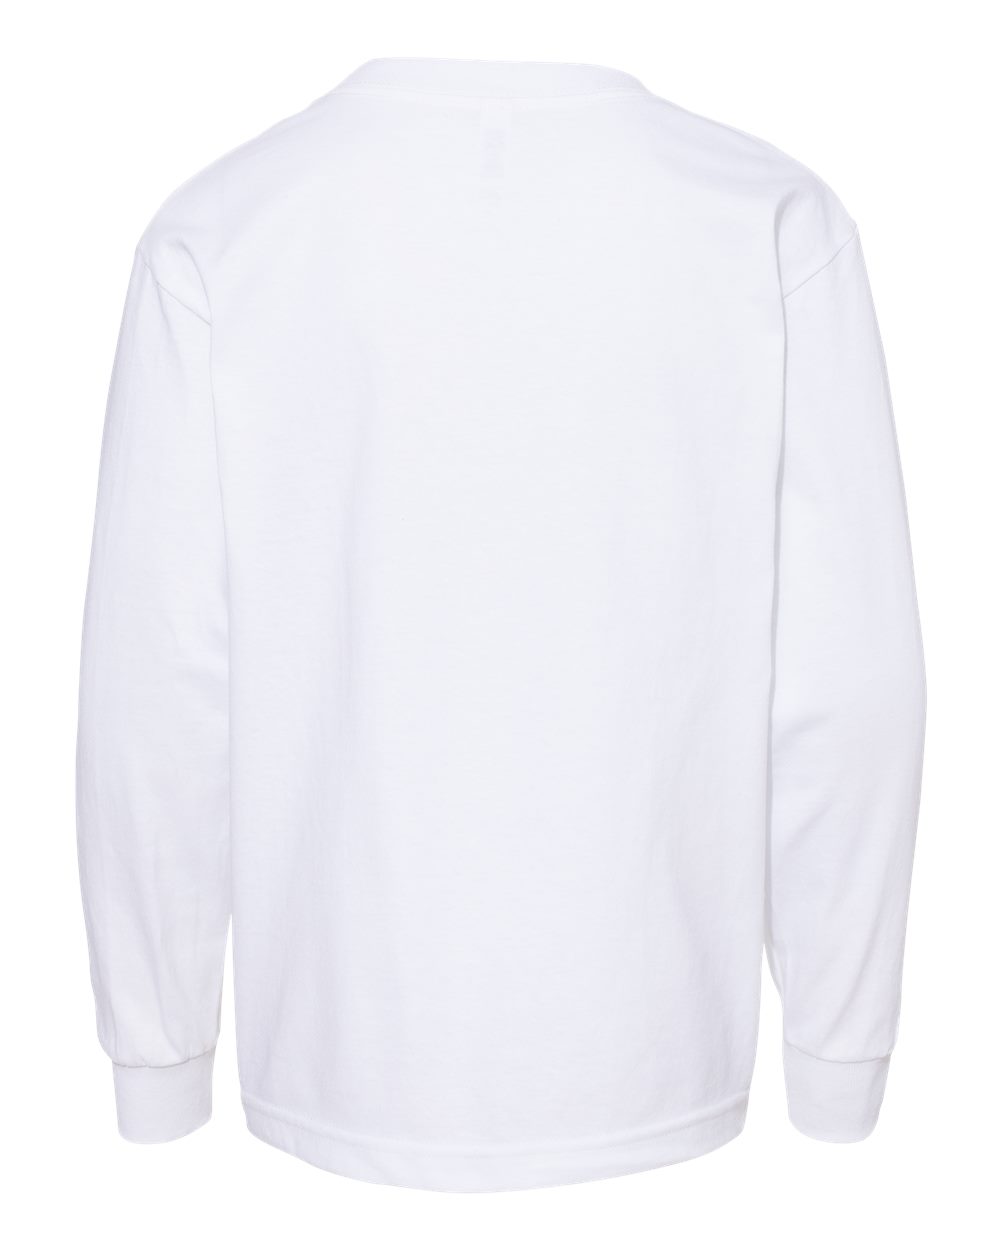 Youth Classic Long Sleeve T-Shirt - 3384-ALSTYLE